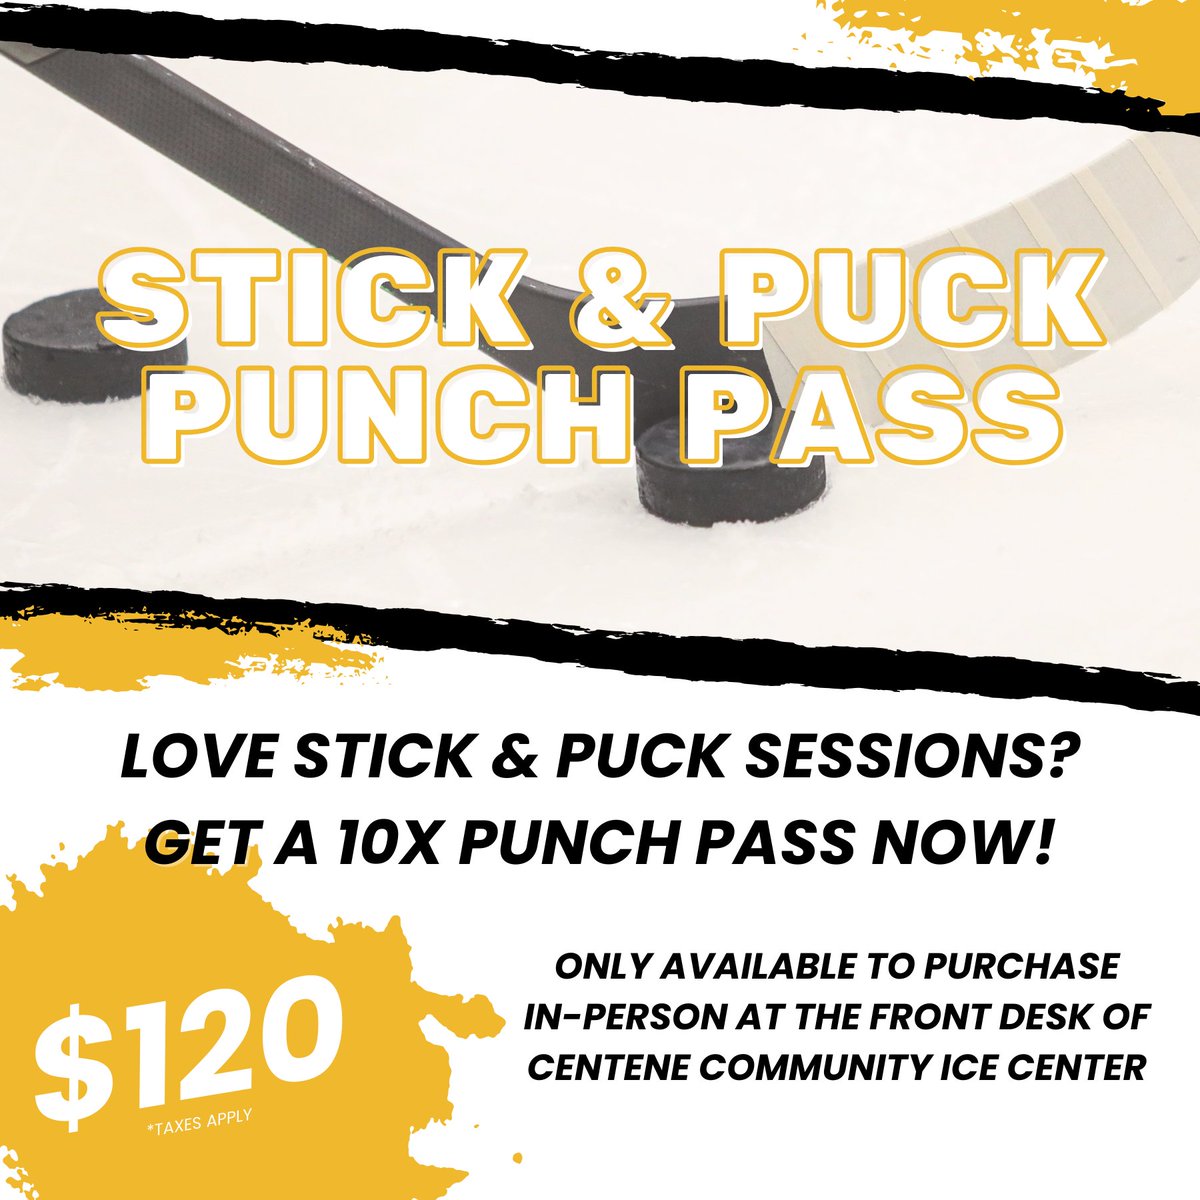 Punch Passes are here🎉Our new passes offer 10 admissions to some of your favorite public ice sessions at a discounted cost! Available now and only in-person at Centene Community Ice Center. Public Skate - $100 Stick & Puck - $120 Freestyle - $80